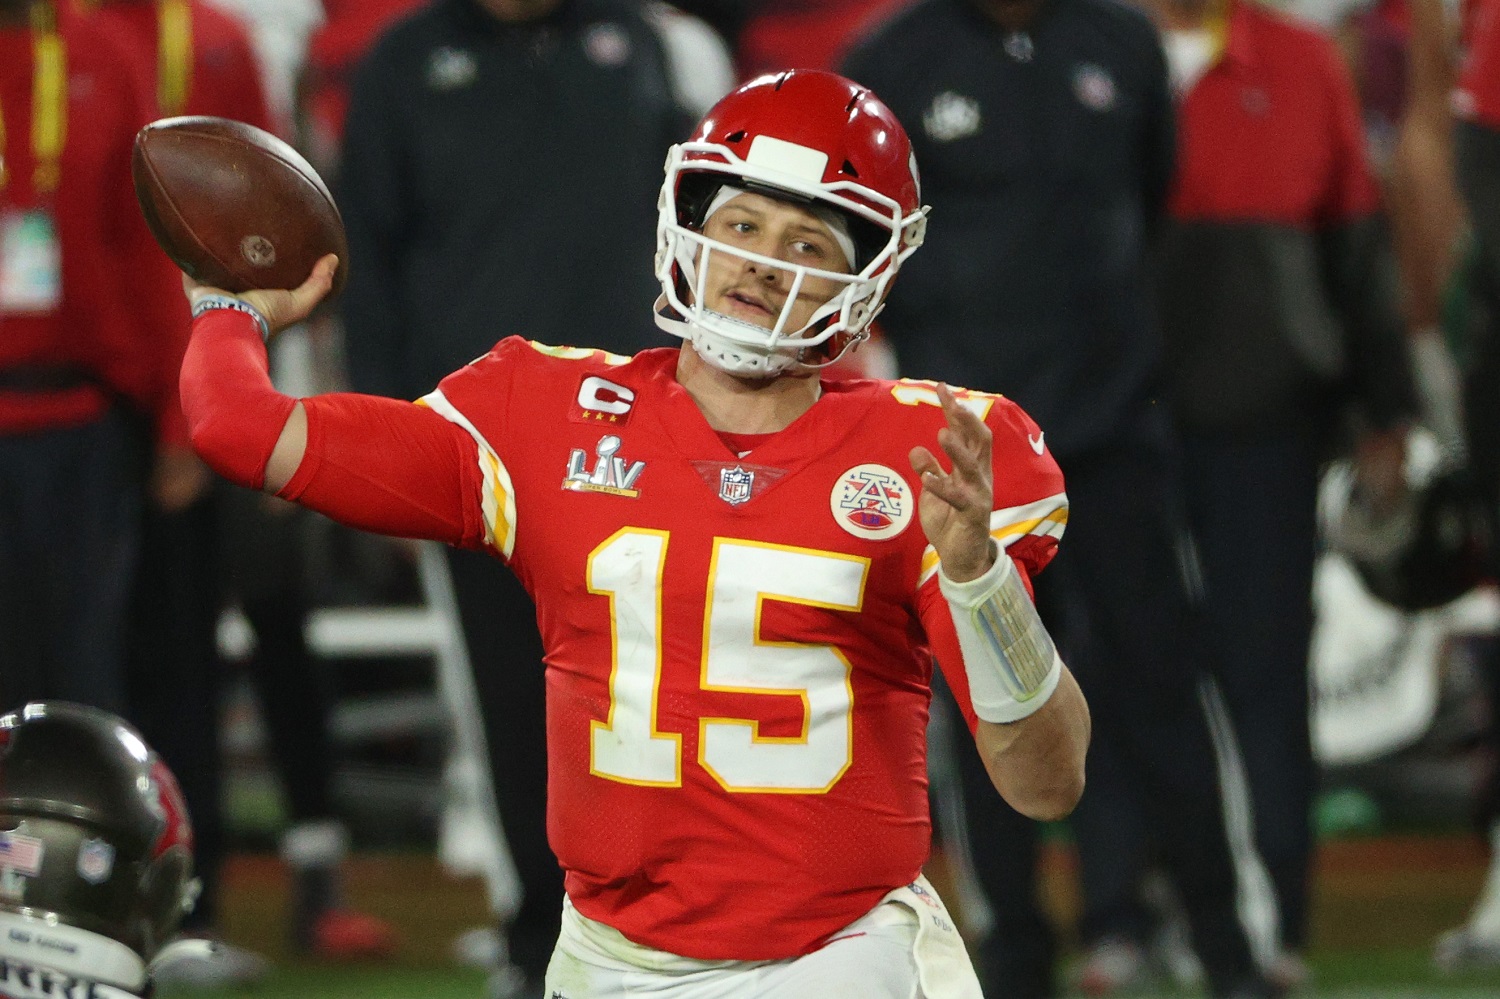 Patrick Mahomes of the Kansas City Chiefs looks to pass in the fourth quarter against the Tampa Bay Buccaneers in Super Bowl 55 at Raymond James Stadium.